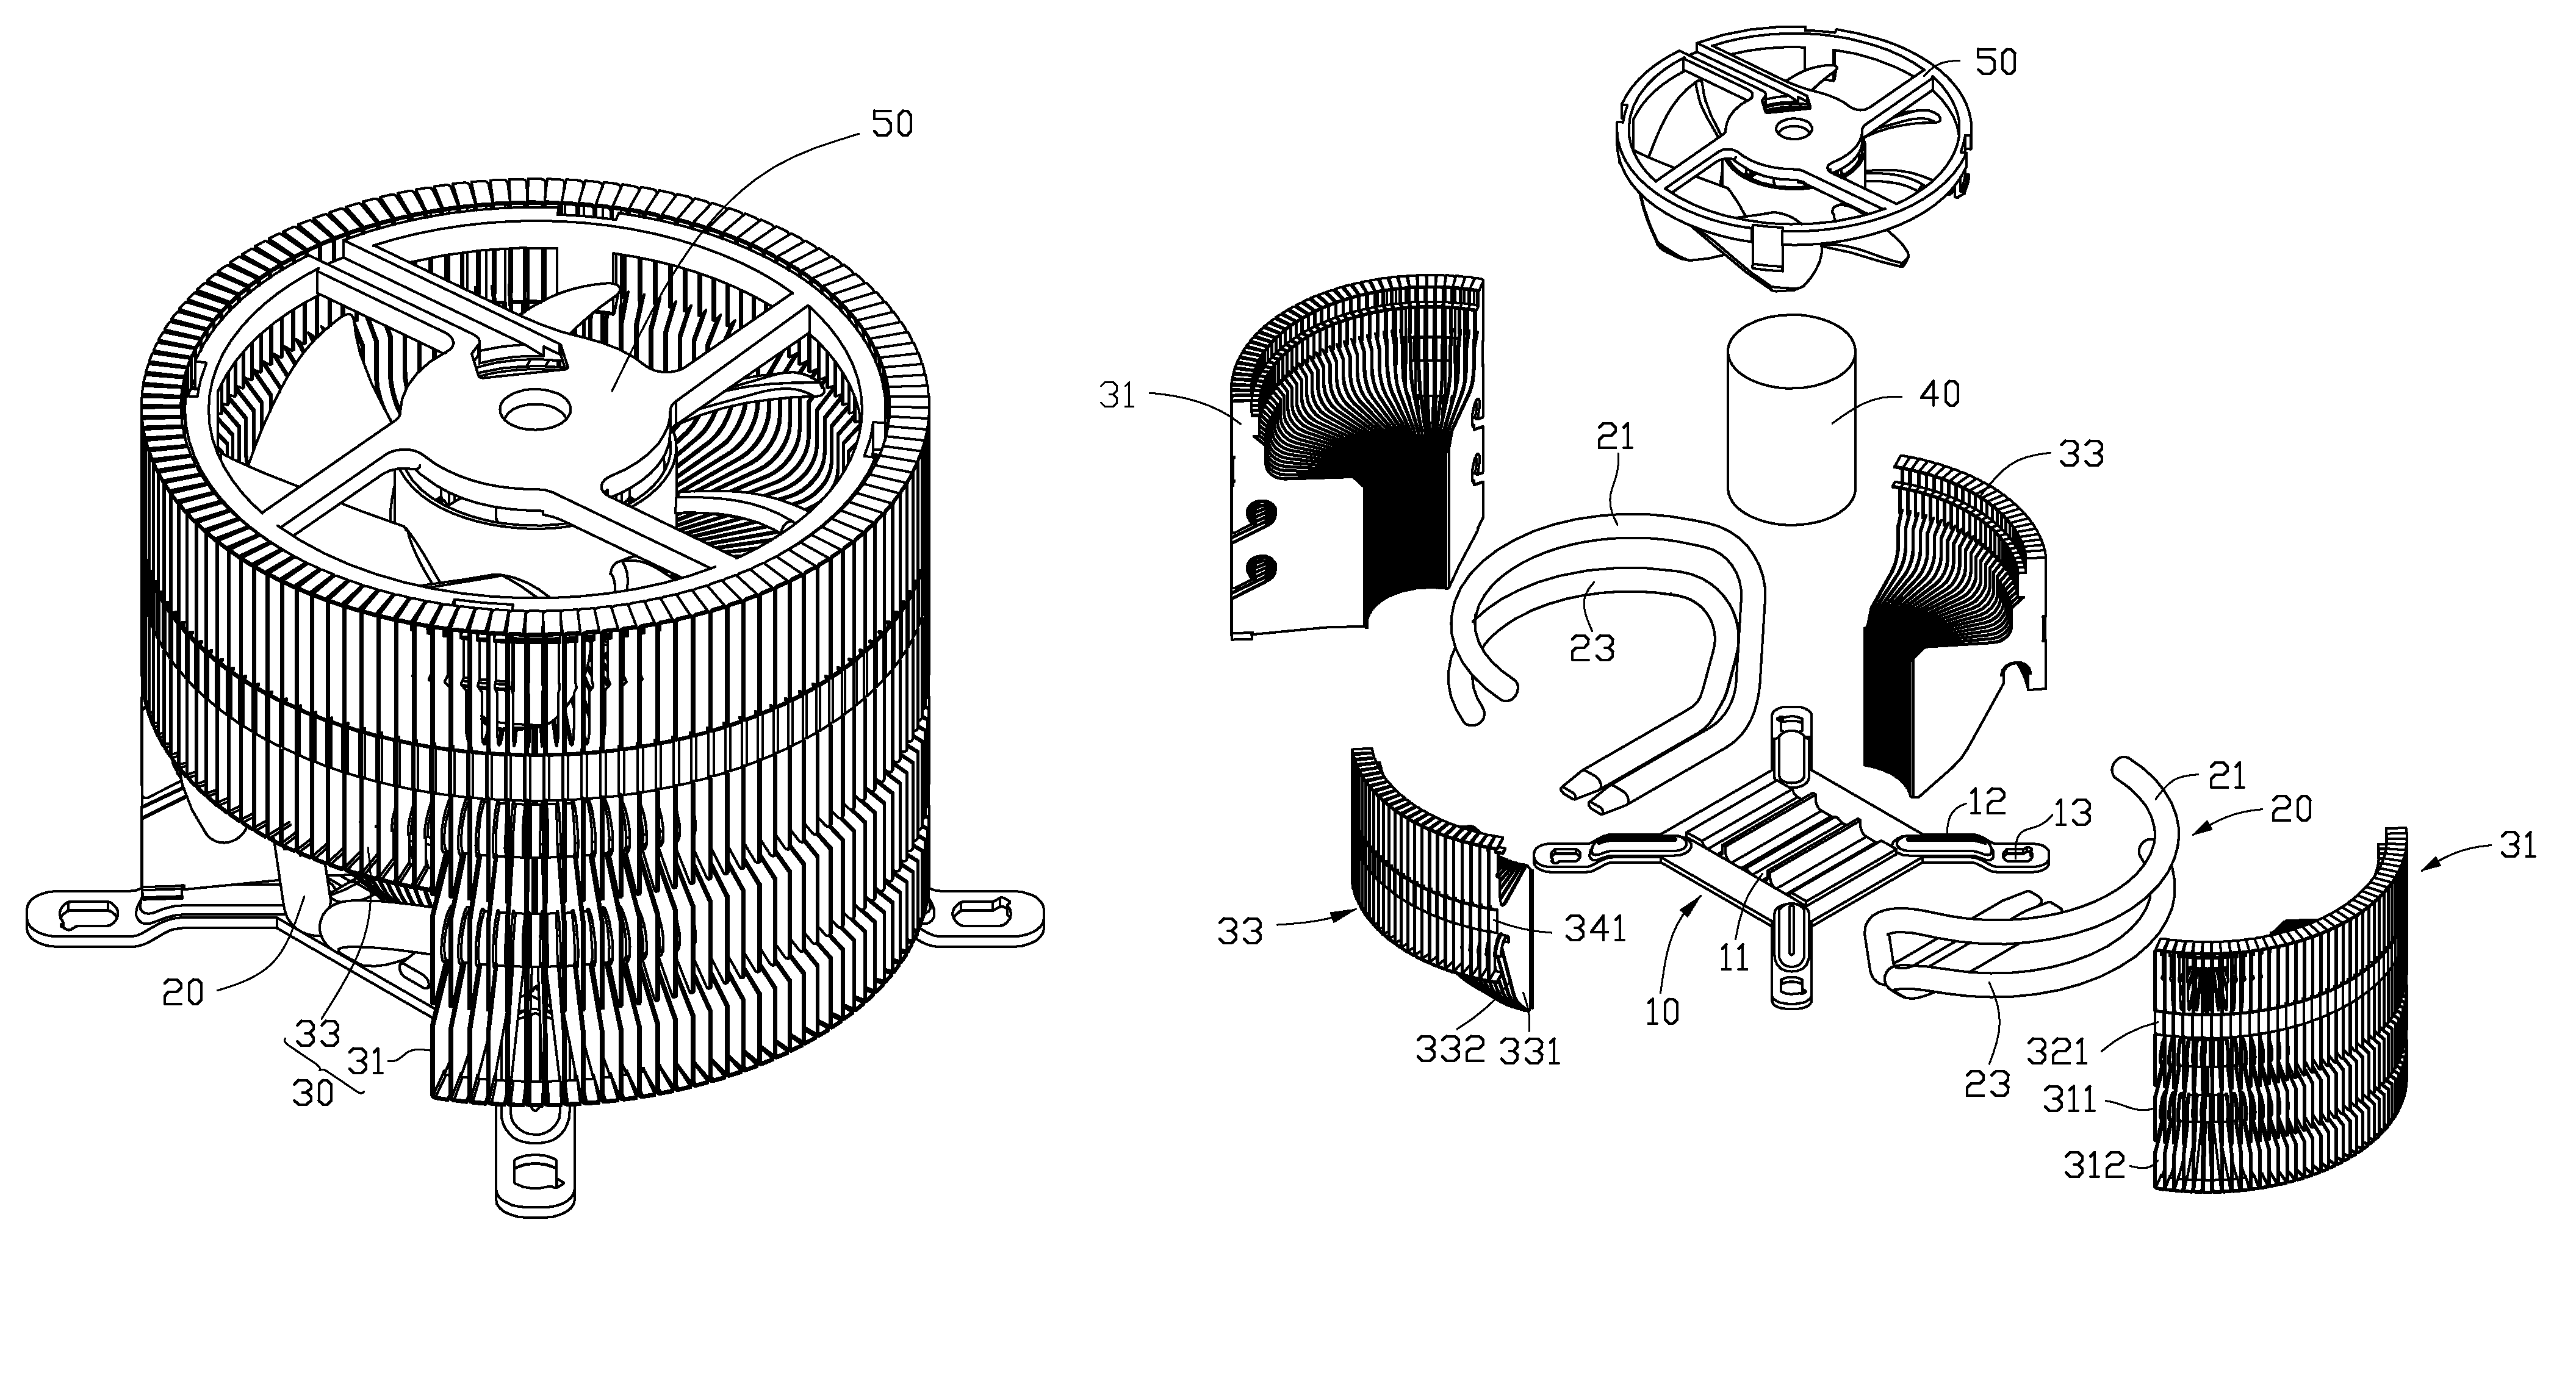 Heat dissipation apparatus having a fan received therein